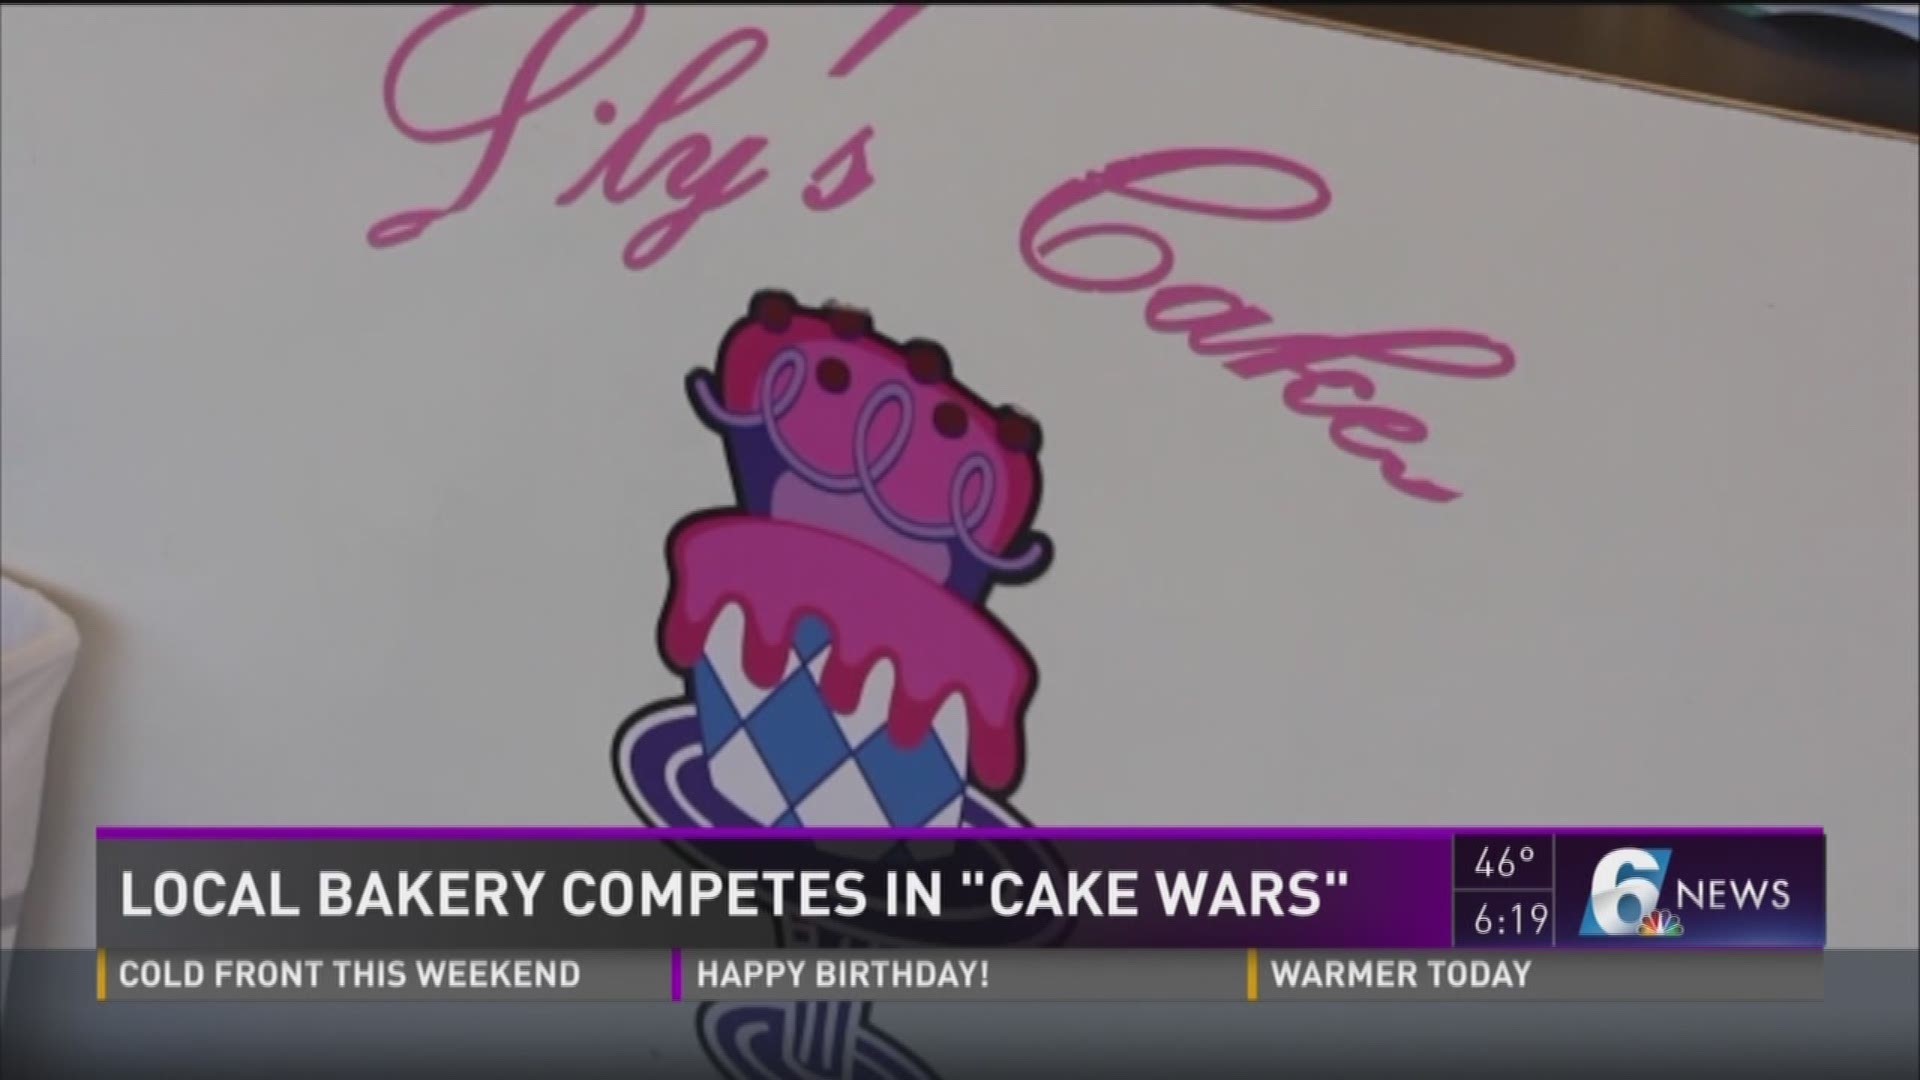 Lily's Cakes recently competed on the Food Network's "Cake Wars". You can watch how the local bakery did Monday January 23rd at 8PM on the Food Network.